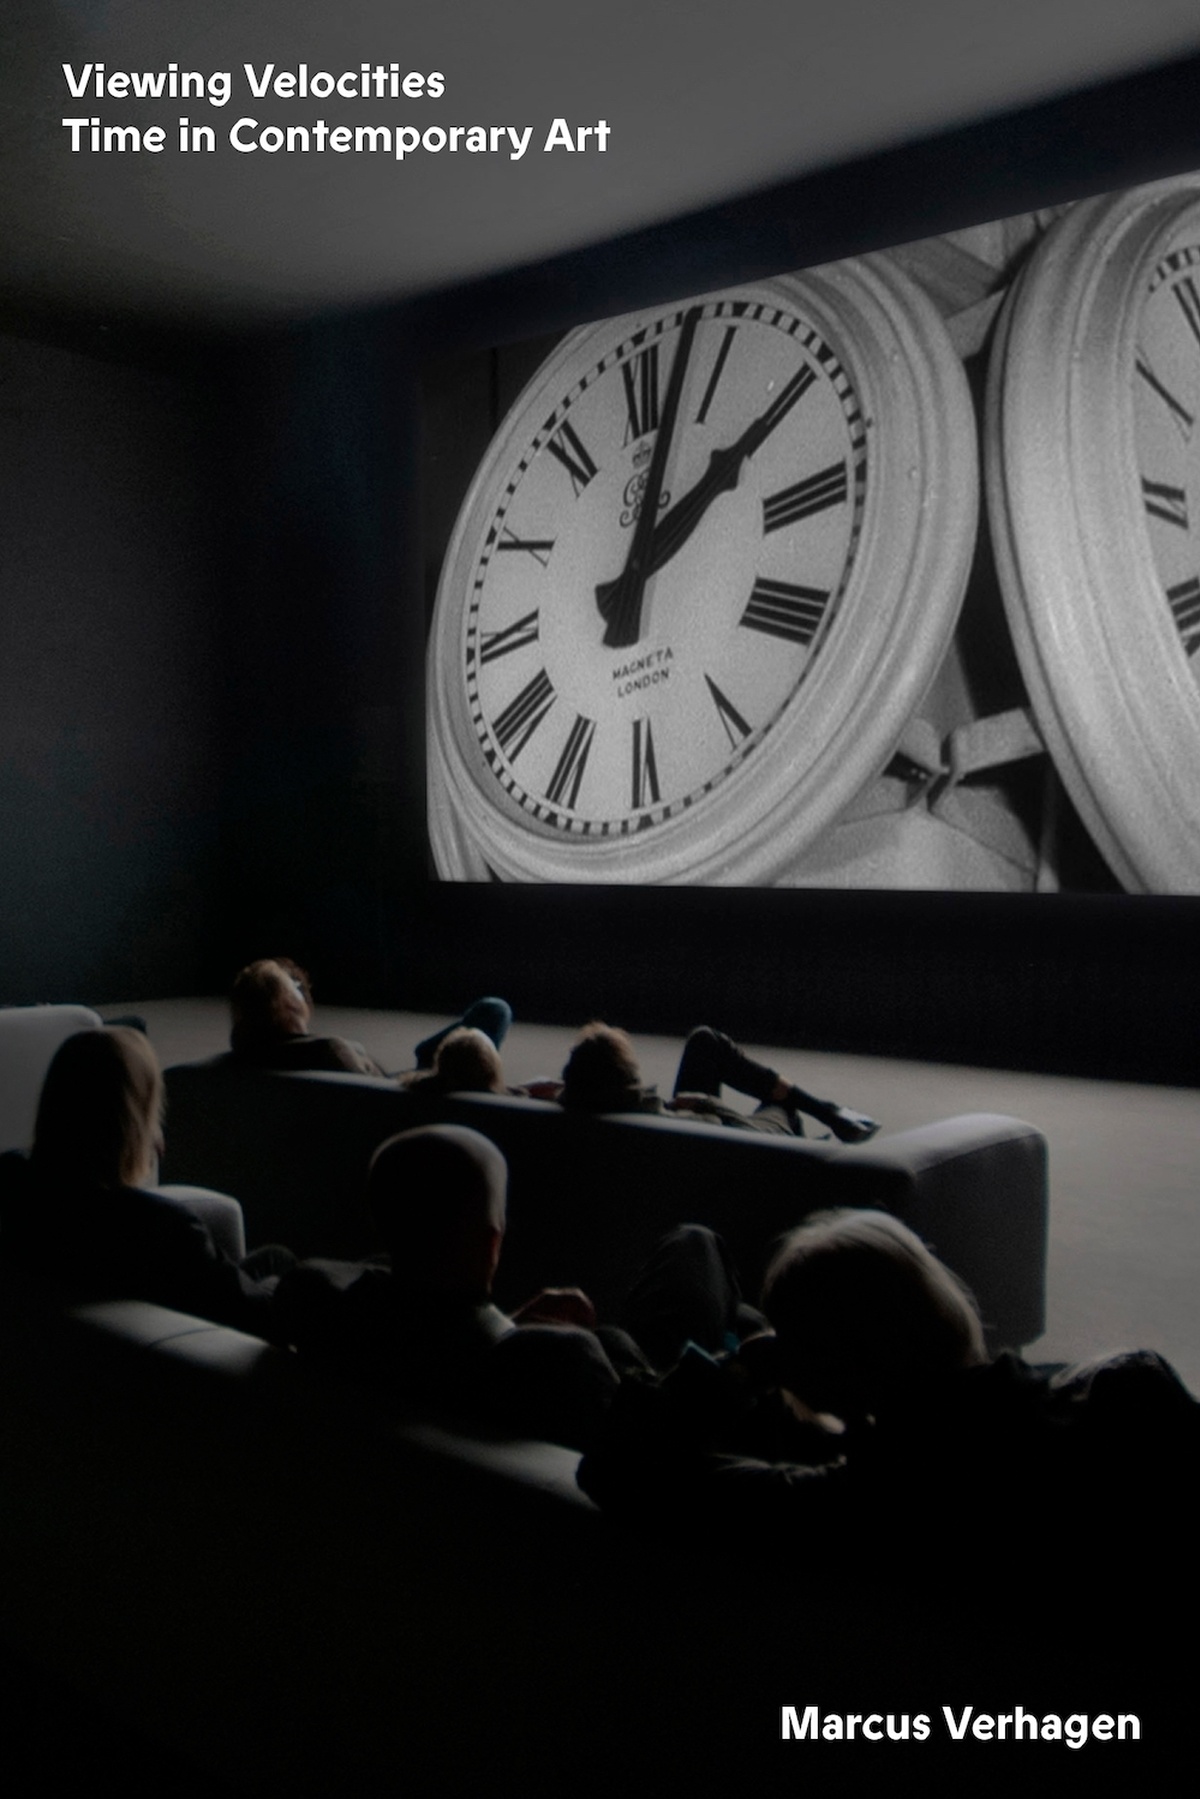 A black and white book cover of a cinema scene with people watching a screen filled with clocks